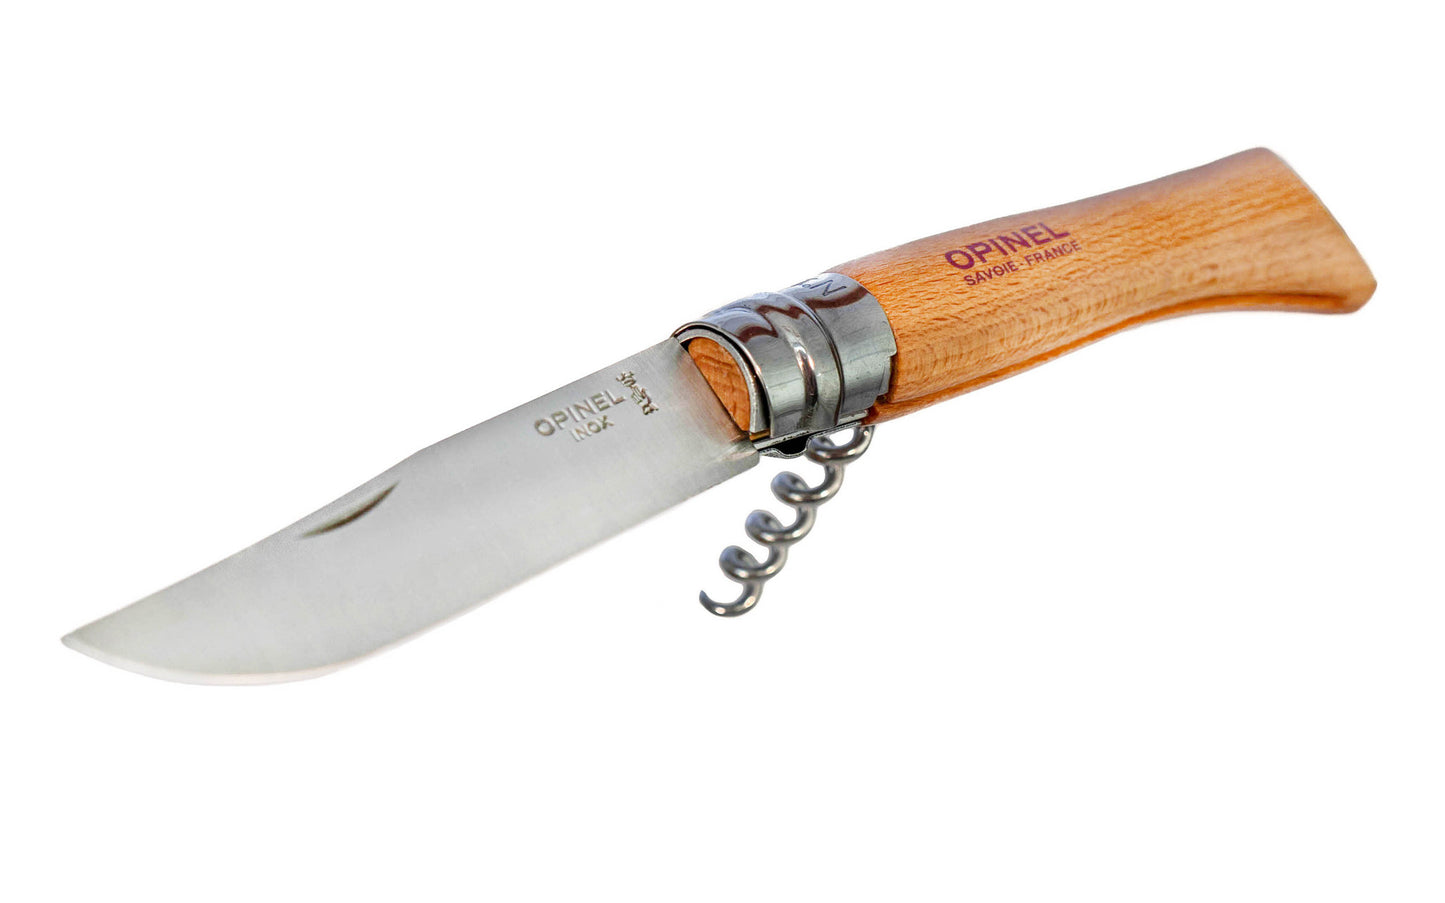 Opinel Stainless Steel Corkscrew Knife ~ Made in France ~ Fantastic for picnics & the kitchen ~ Great for wine & cheese ~ 3-15/16" stainless long foldable blade ~ Corkscrew folds into handle